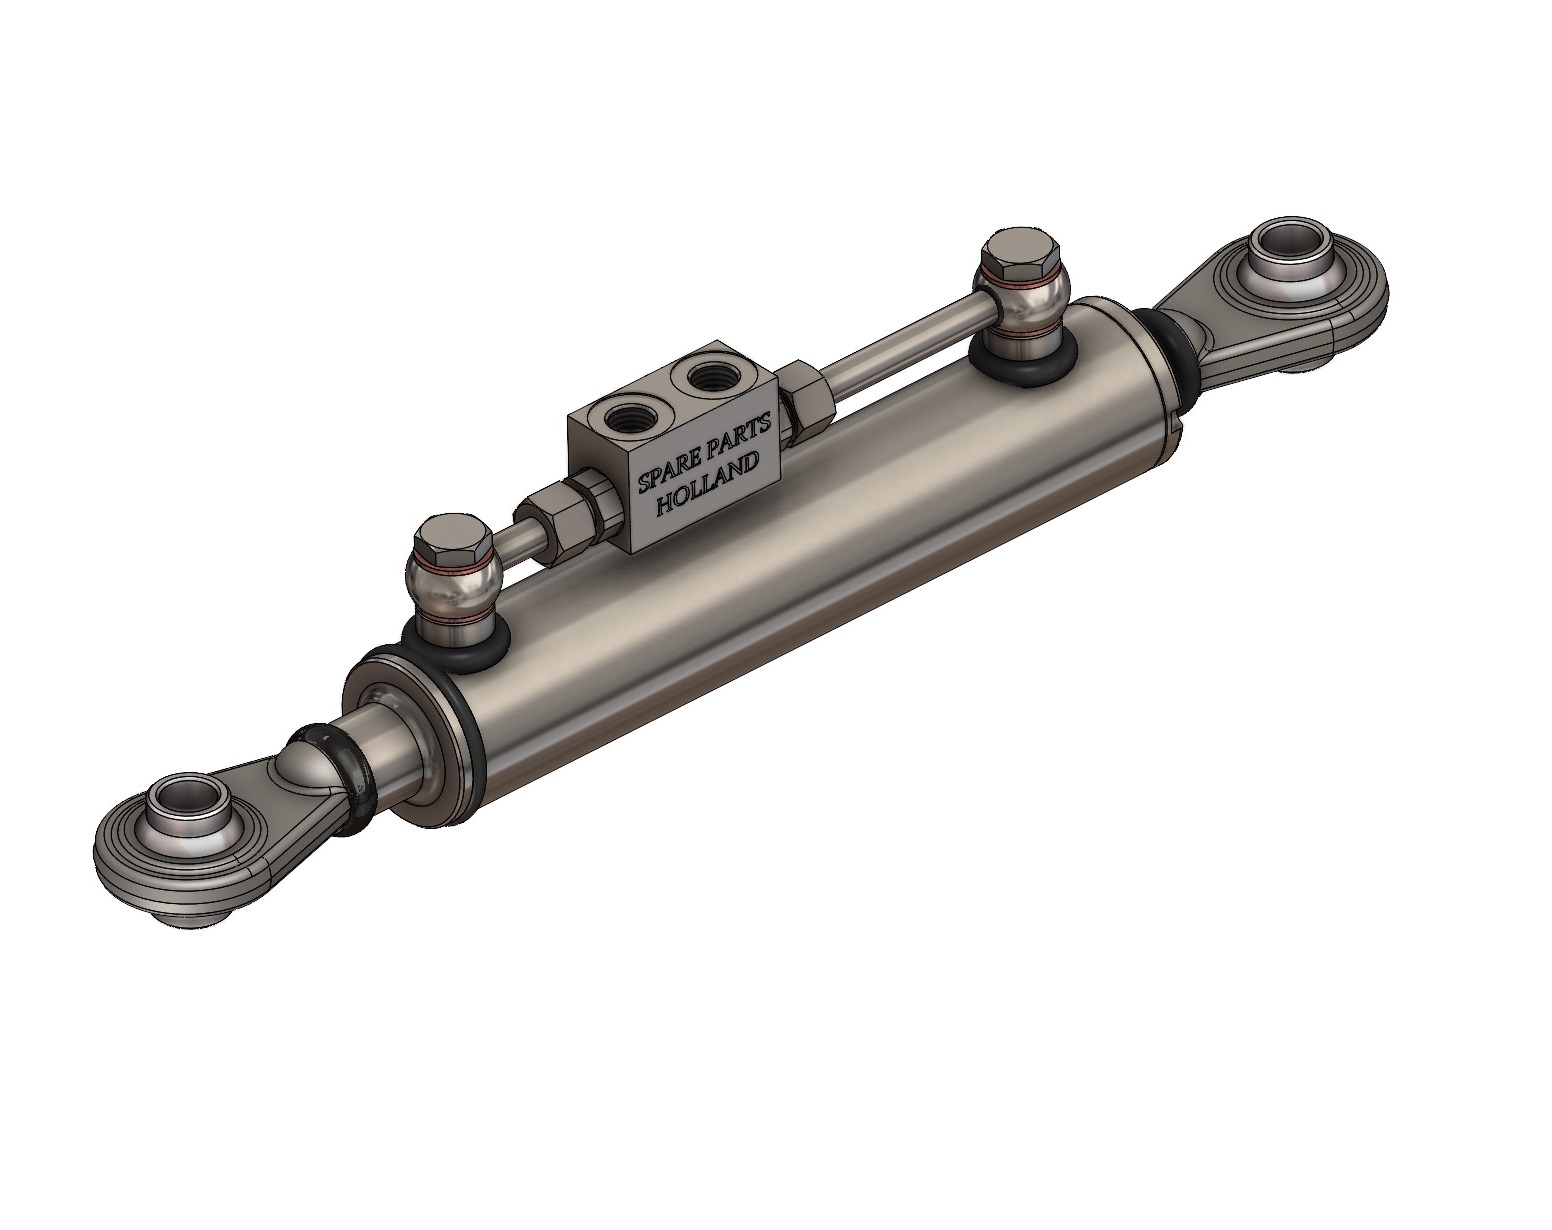 Hydraulic Top Link Cat. 1-1 – Extended – (19 5/16” – 27 9/16”) with Locking Block and 2 x Hoses